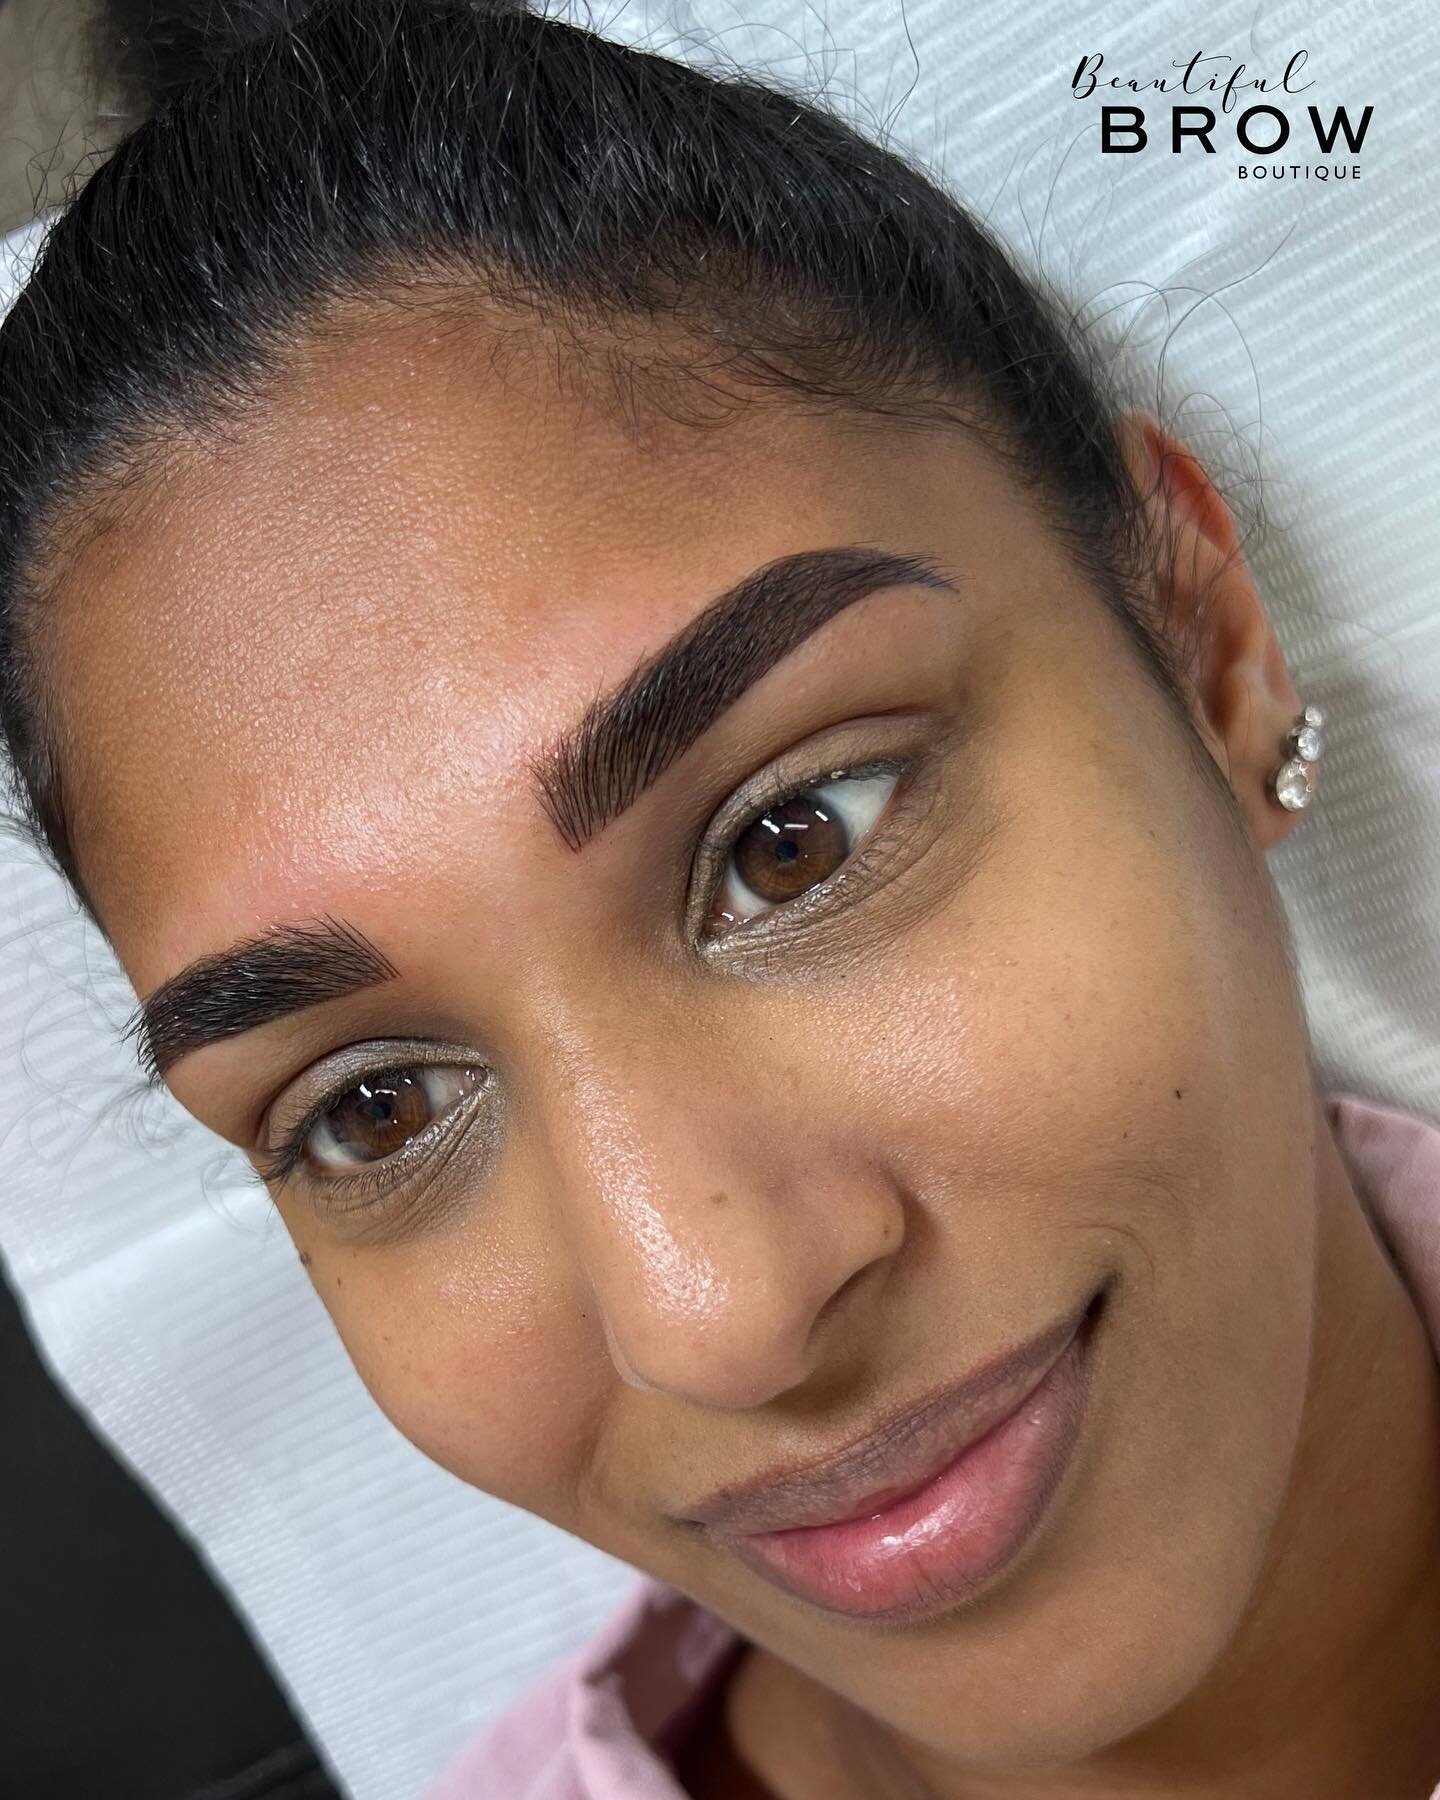 Combination brows on this beauty. 

What type of brow do you want? Tell us your brow goals - Whether you only want a few hair strokes to fill in gaps, have neat uniform hairstrokes , a more filled in brow like pomade , a bold full brow , or a subtle 